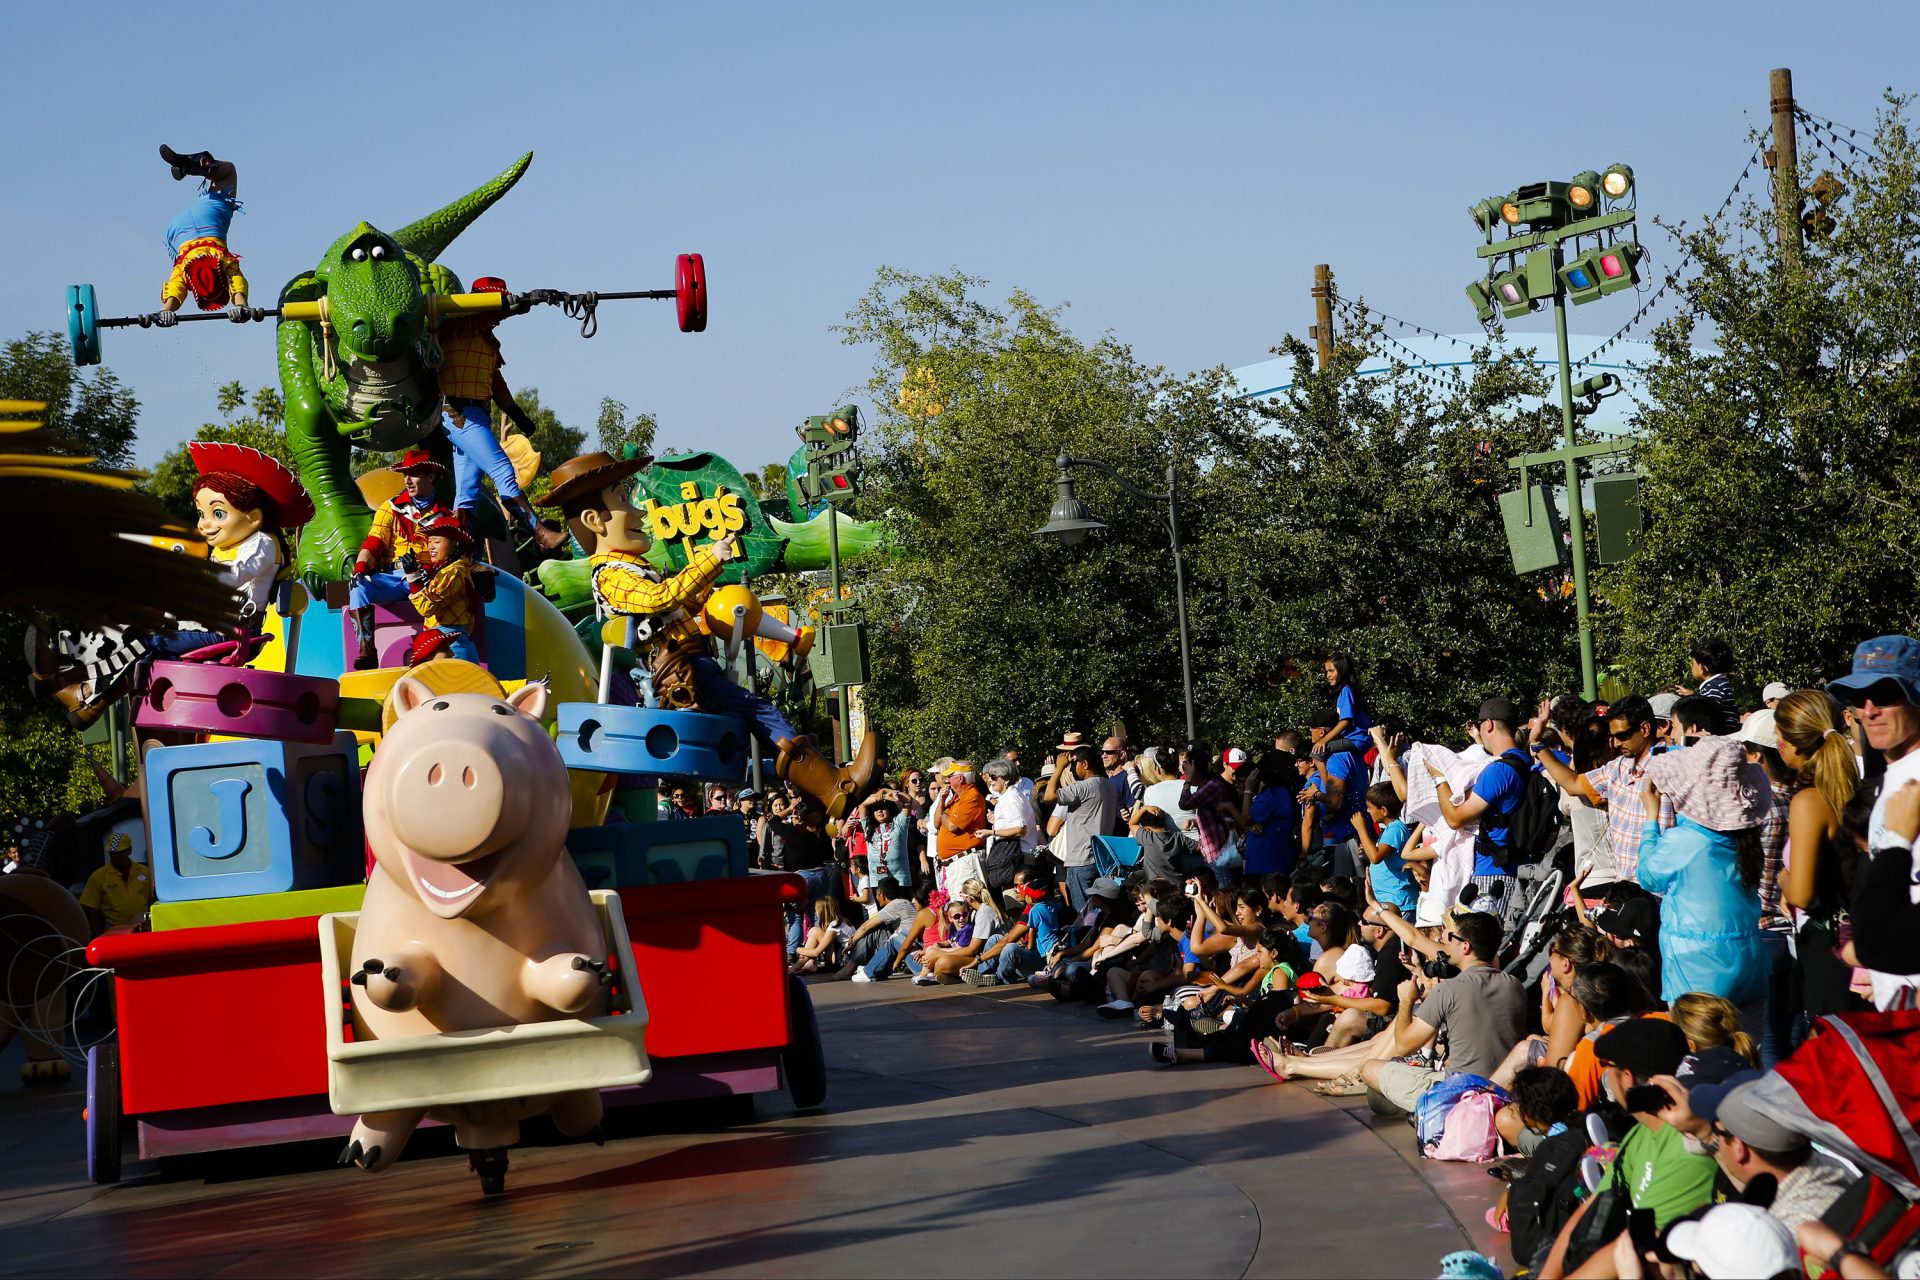 Viral Woody & Jessie Video At Disney Parade Sparks Comparisons To Sesame Street Characters